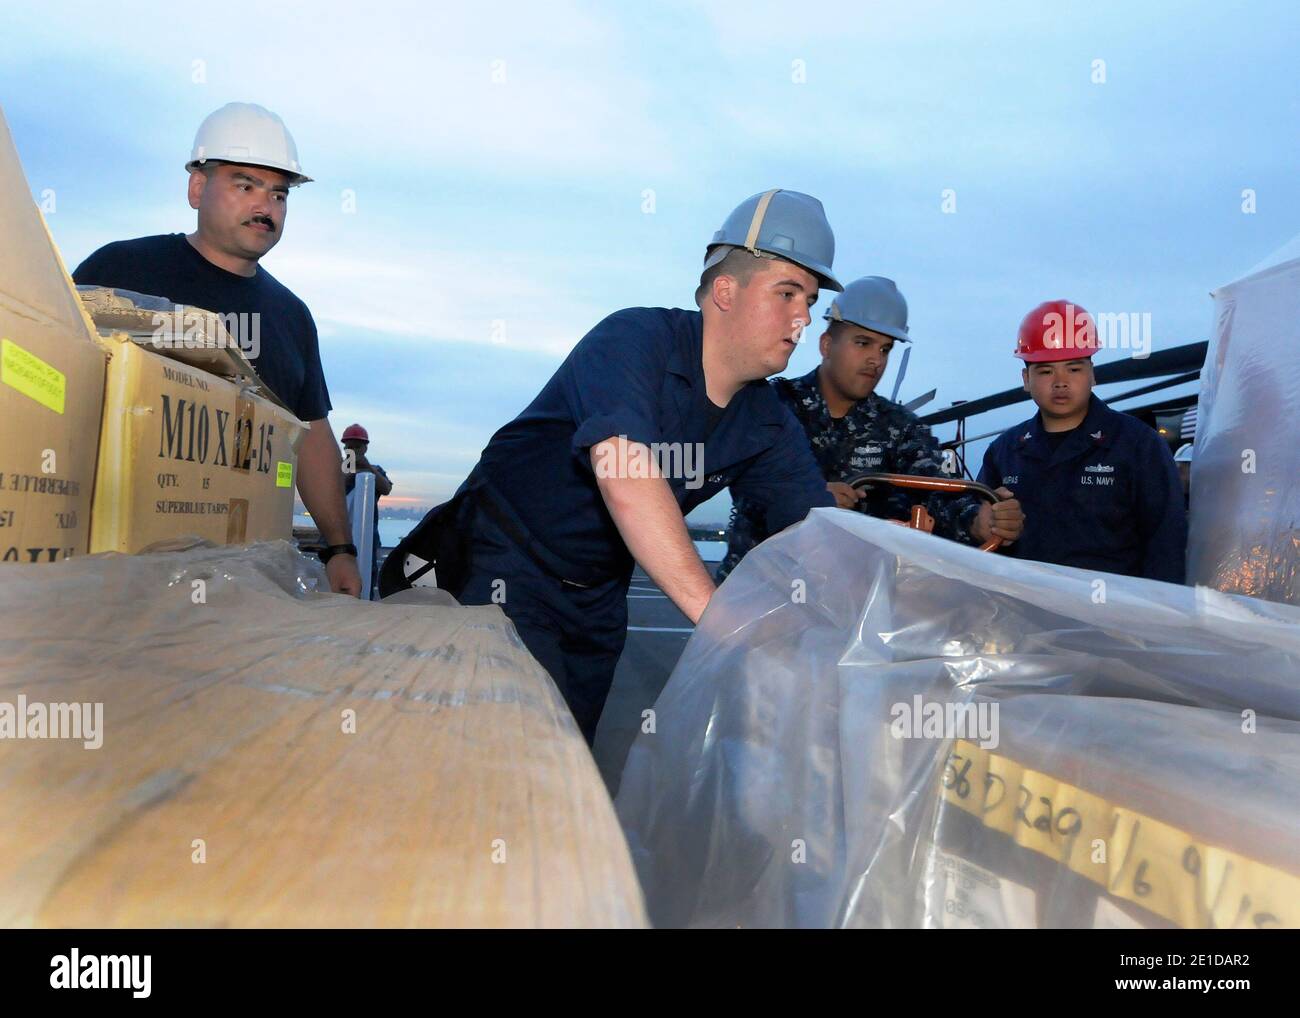 Master Chief Information Systems Technician Lonnie Gillian, left, Ship's Serviceman Seaman William Cody, Gunner's Mate 1st Class Eduardo Soto and Operation's Specialist 2nd Class Glennaldrin Mupas load humanitarian assistance supplies aboard the U.S. 7th Fleet command ship USS Blue Ridge (LCC 19) in Singapore, MArch 11, 2011, to ensure the ship and crew are ready if directed to support earthquake and tsunami relief operations in Japan. Photo by NVNS via ABACAPRESS.COM Stock Photo